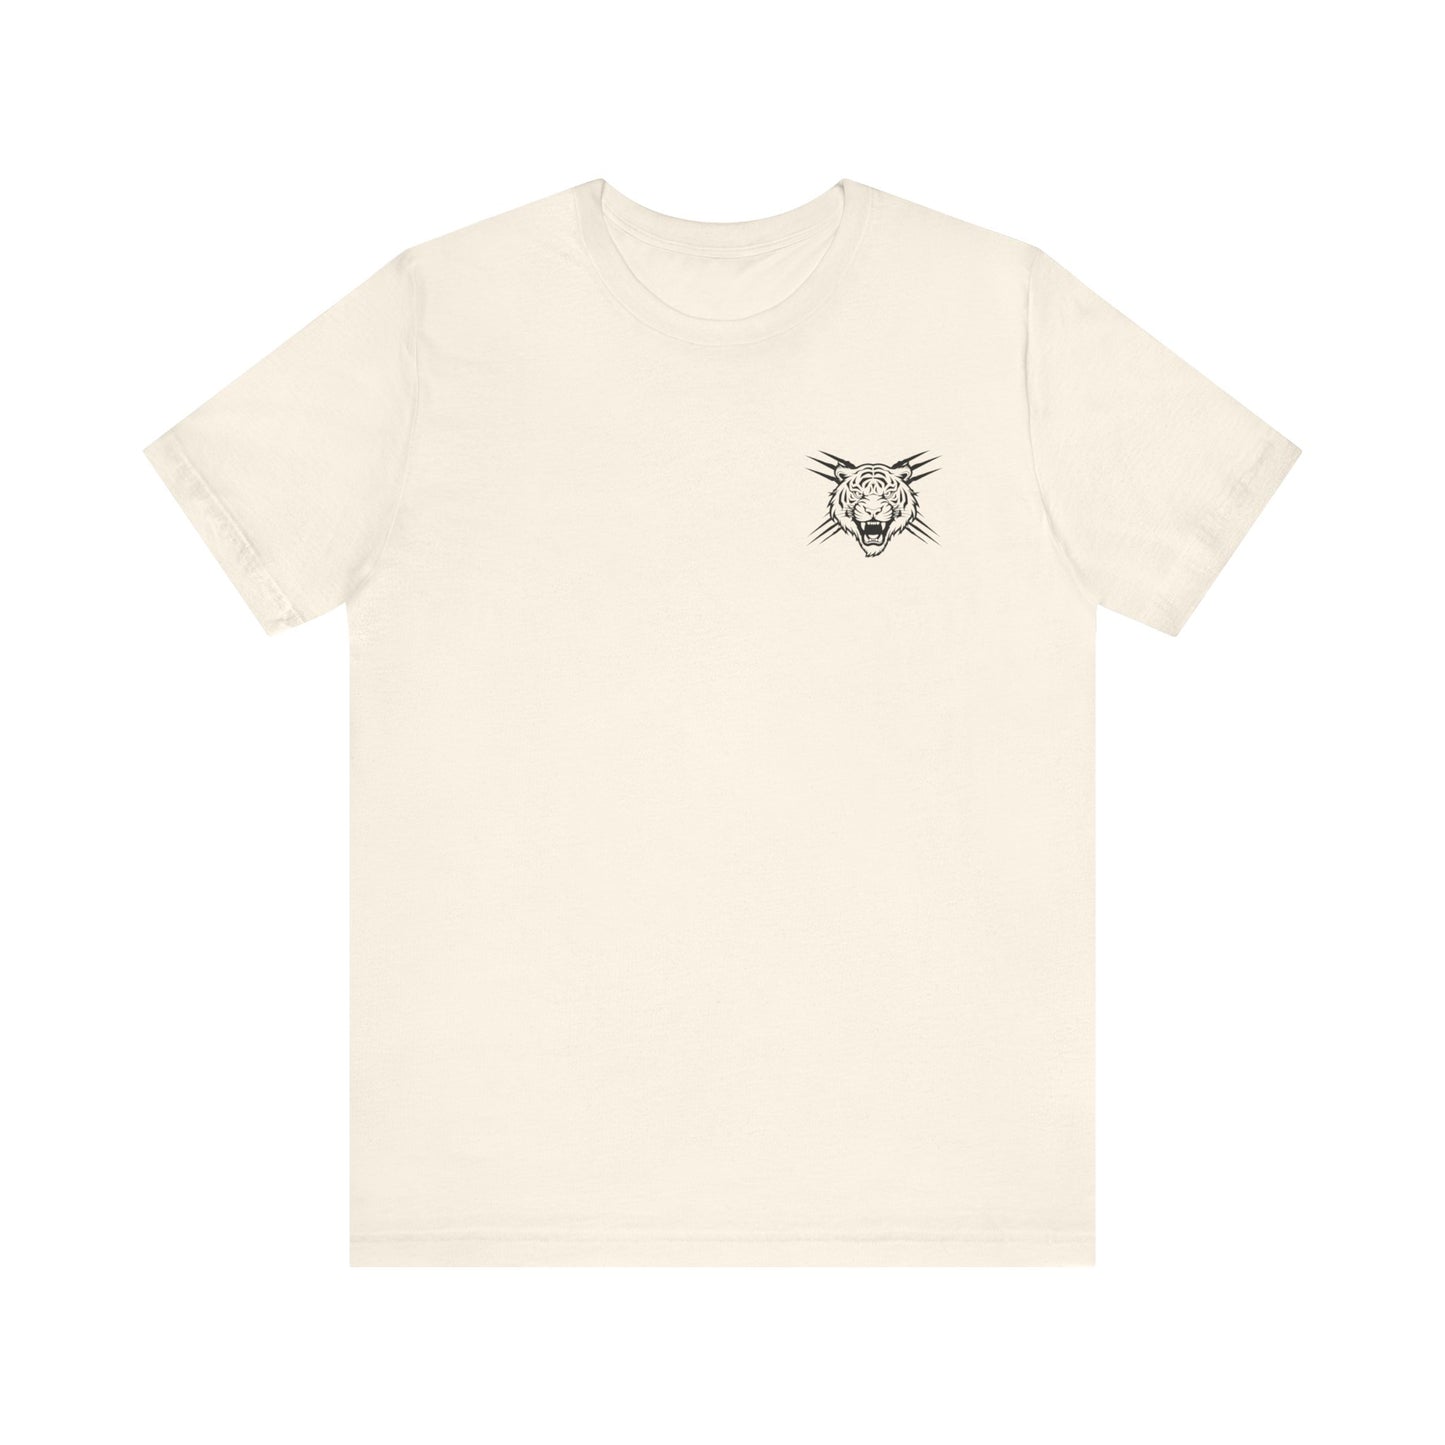 Vice and Virtue TX Tee